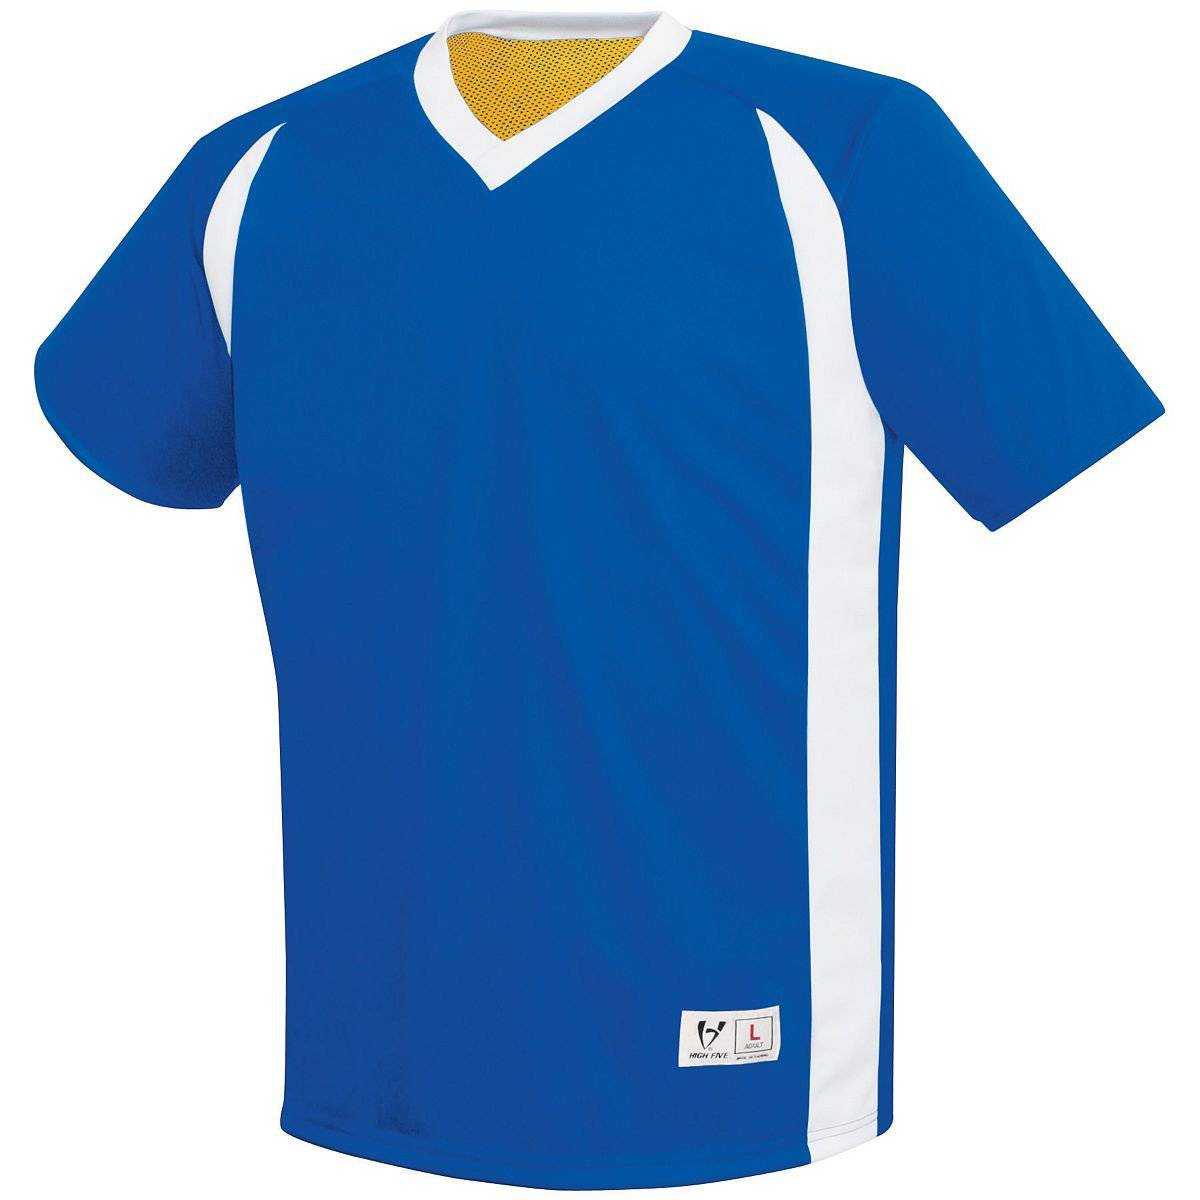 High Five 372550 Dynamic Reversible Jersey Adult - Royal White Gold - HIT a Double